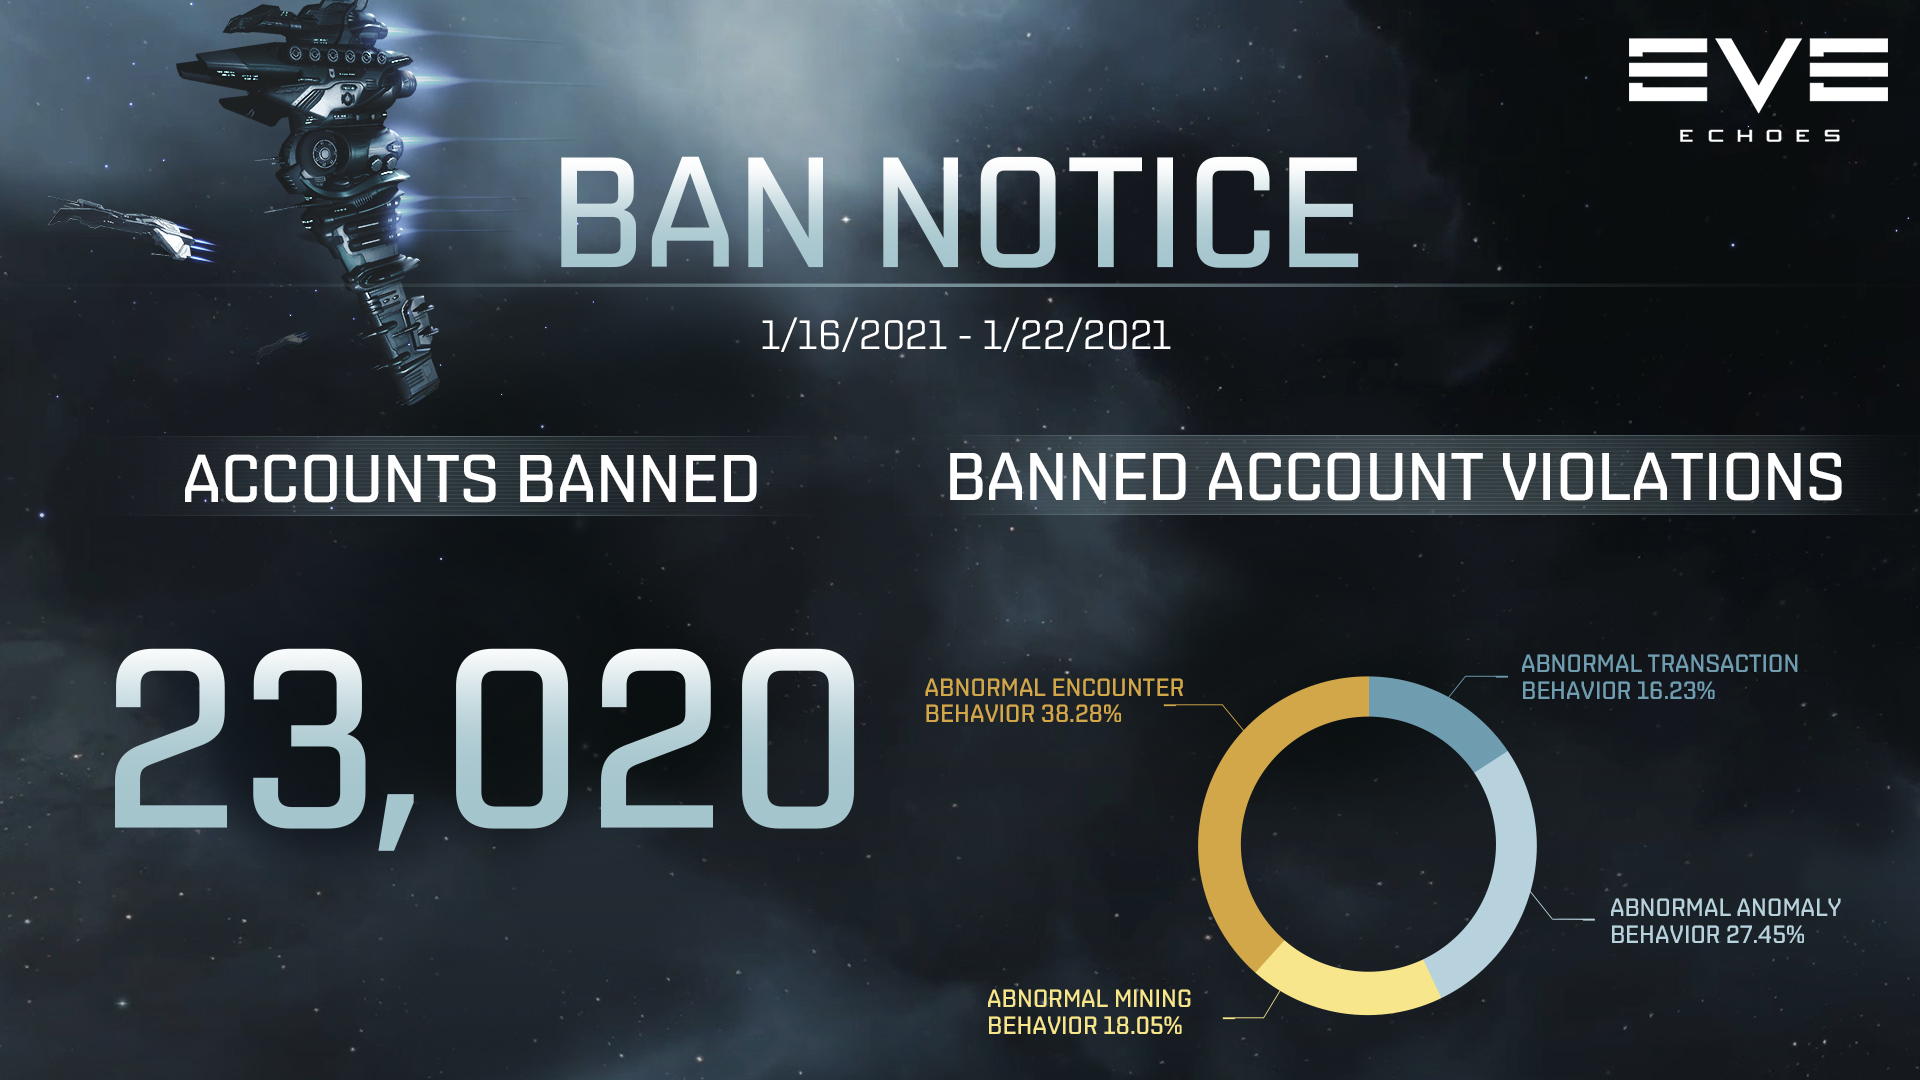 Ban Notice for 01/16-01/22